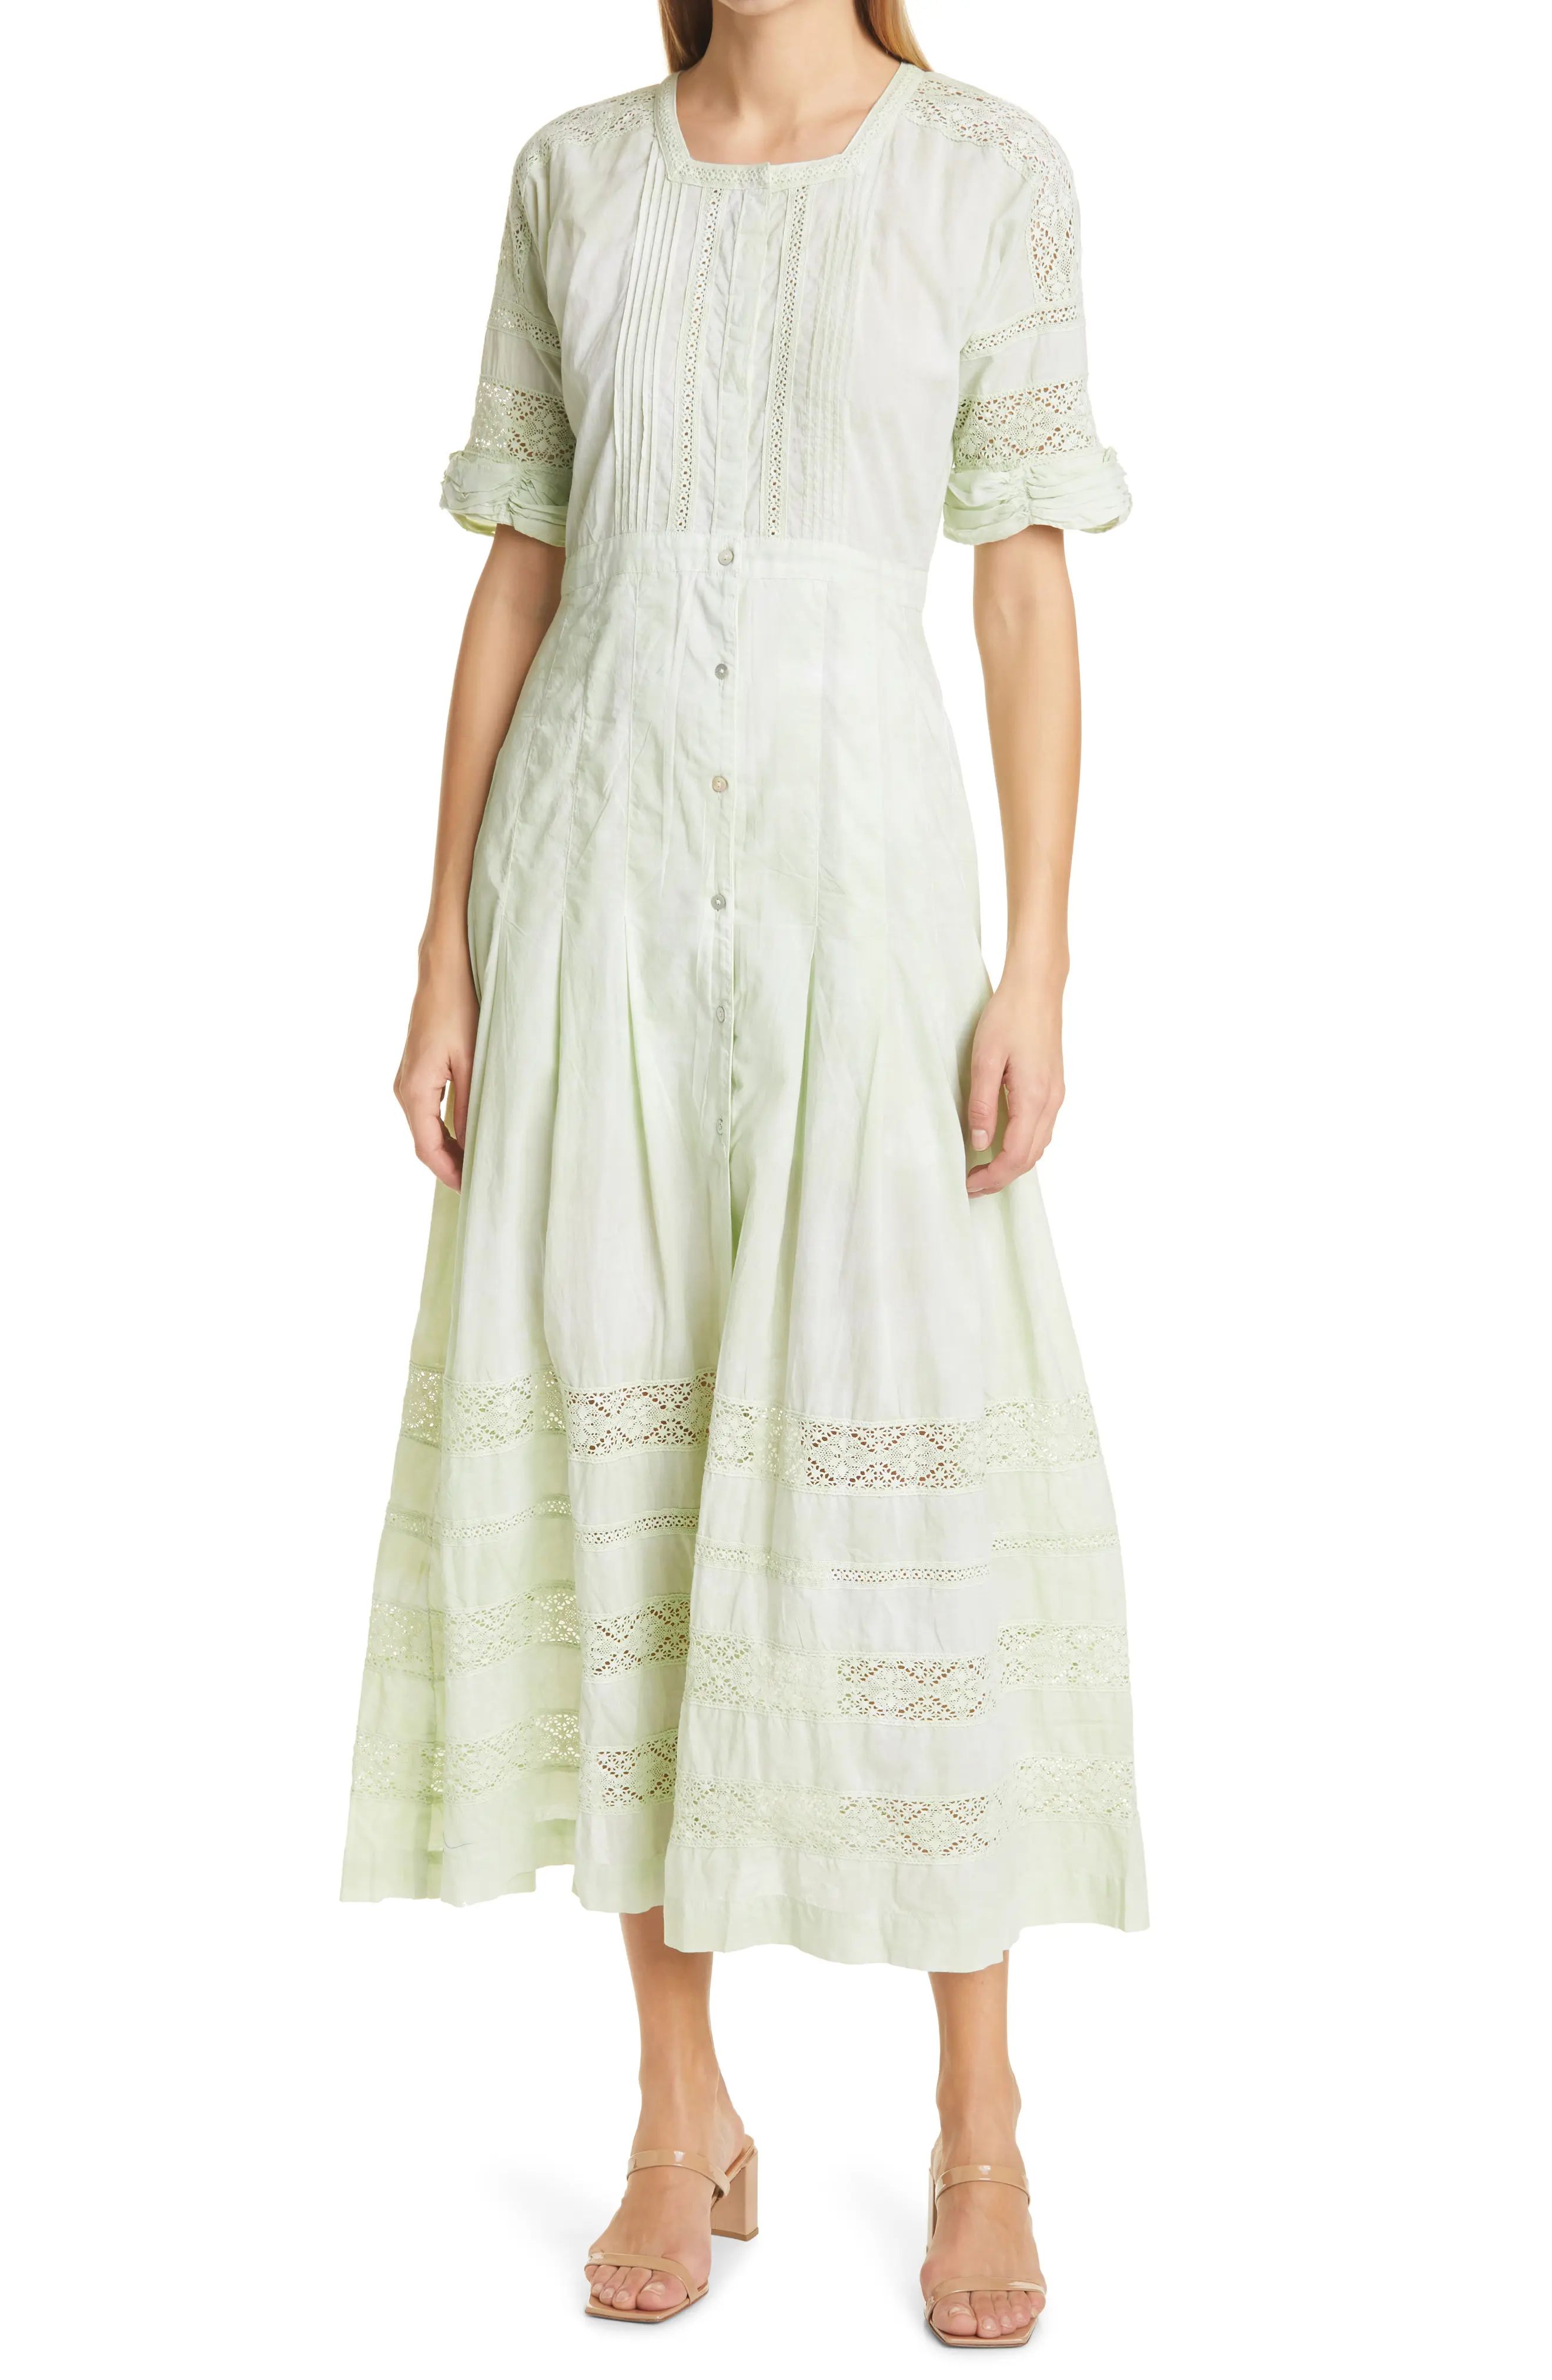 LoveShackFancy Edie Lace Inset Midi Dress in Moss Green Hand Dye at Nordstrom, Size Large | Nordstrom